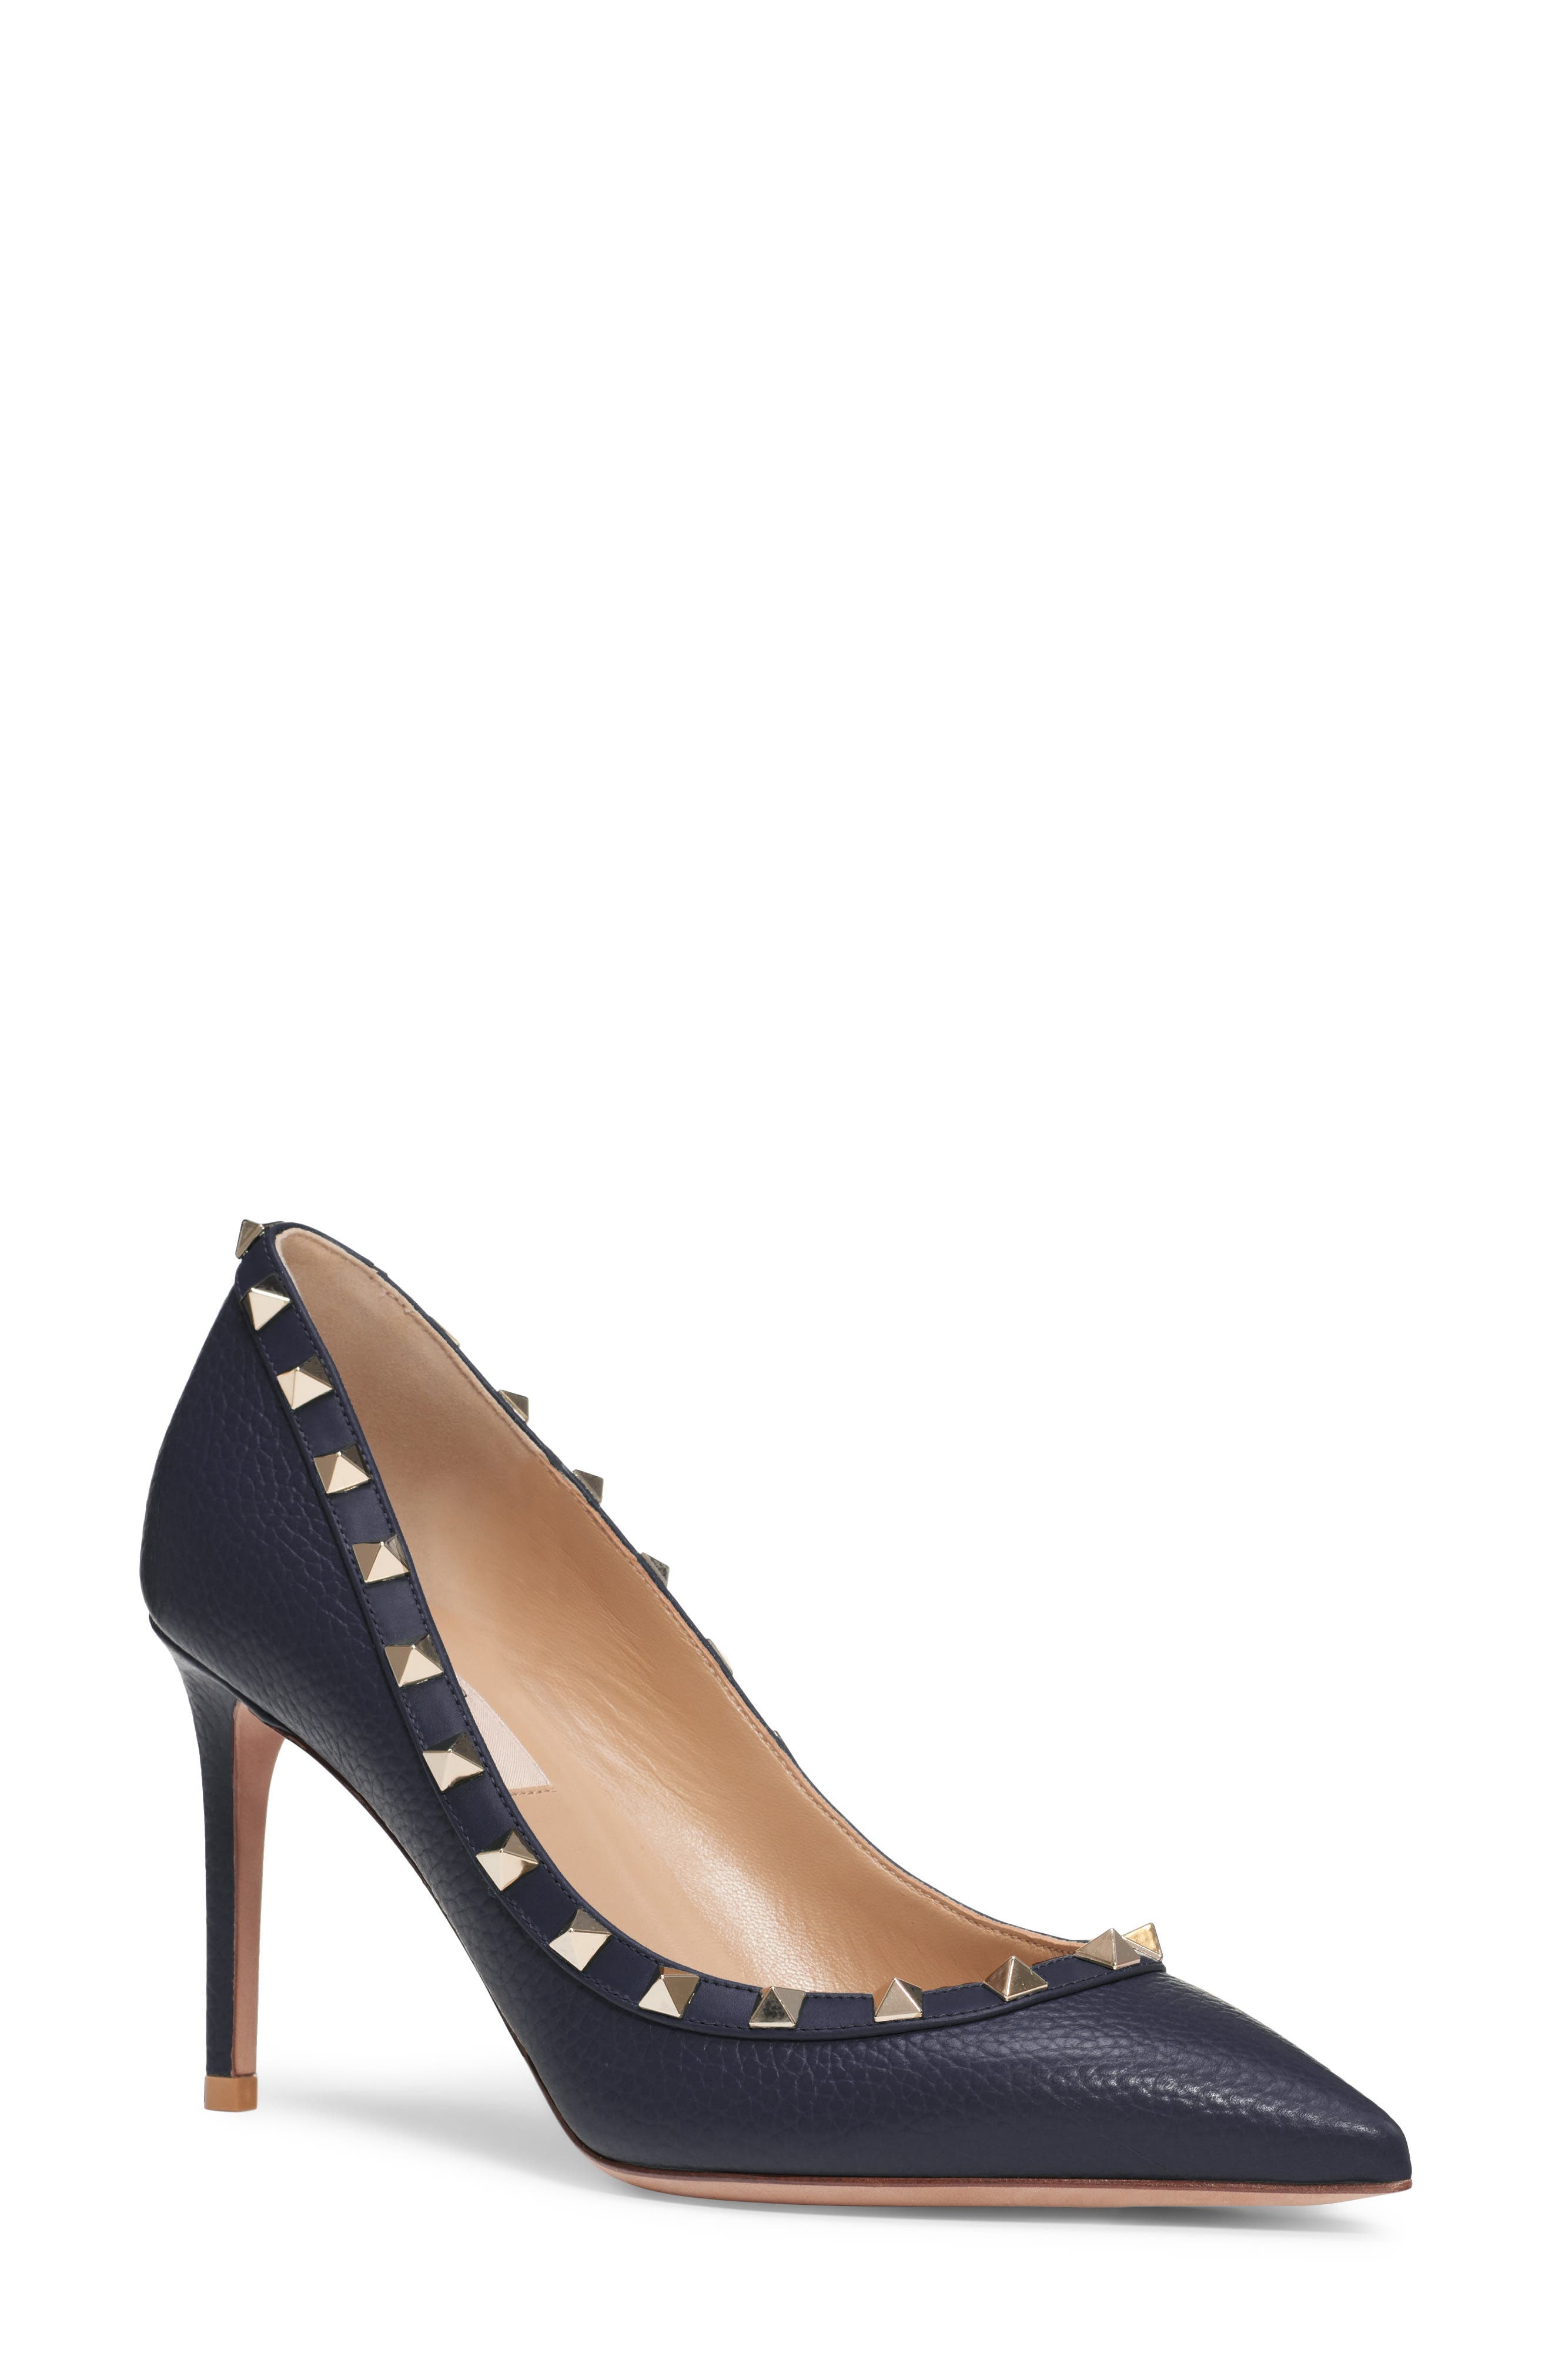 valentino shoes sale nordstrom